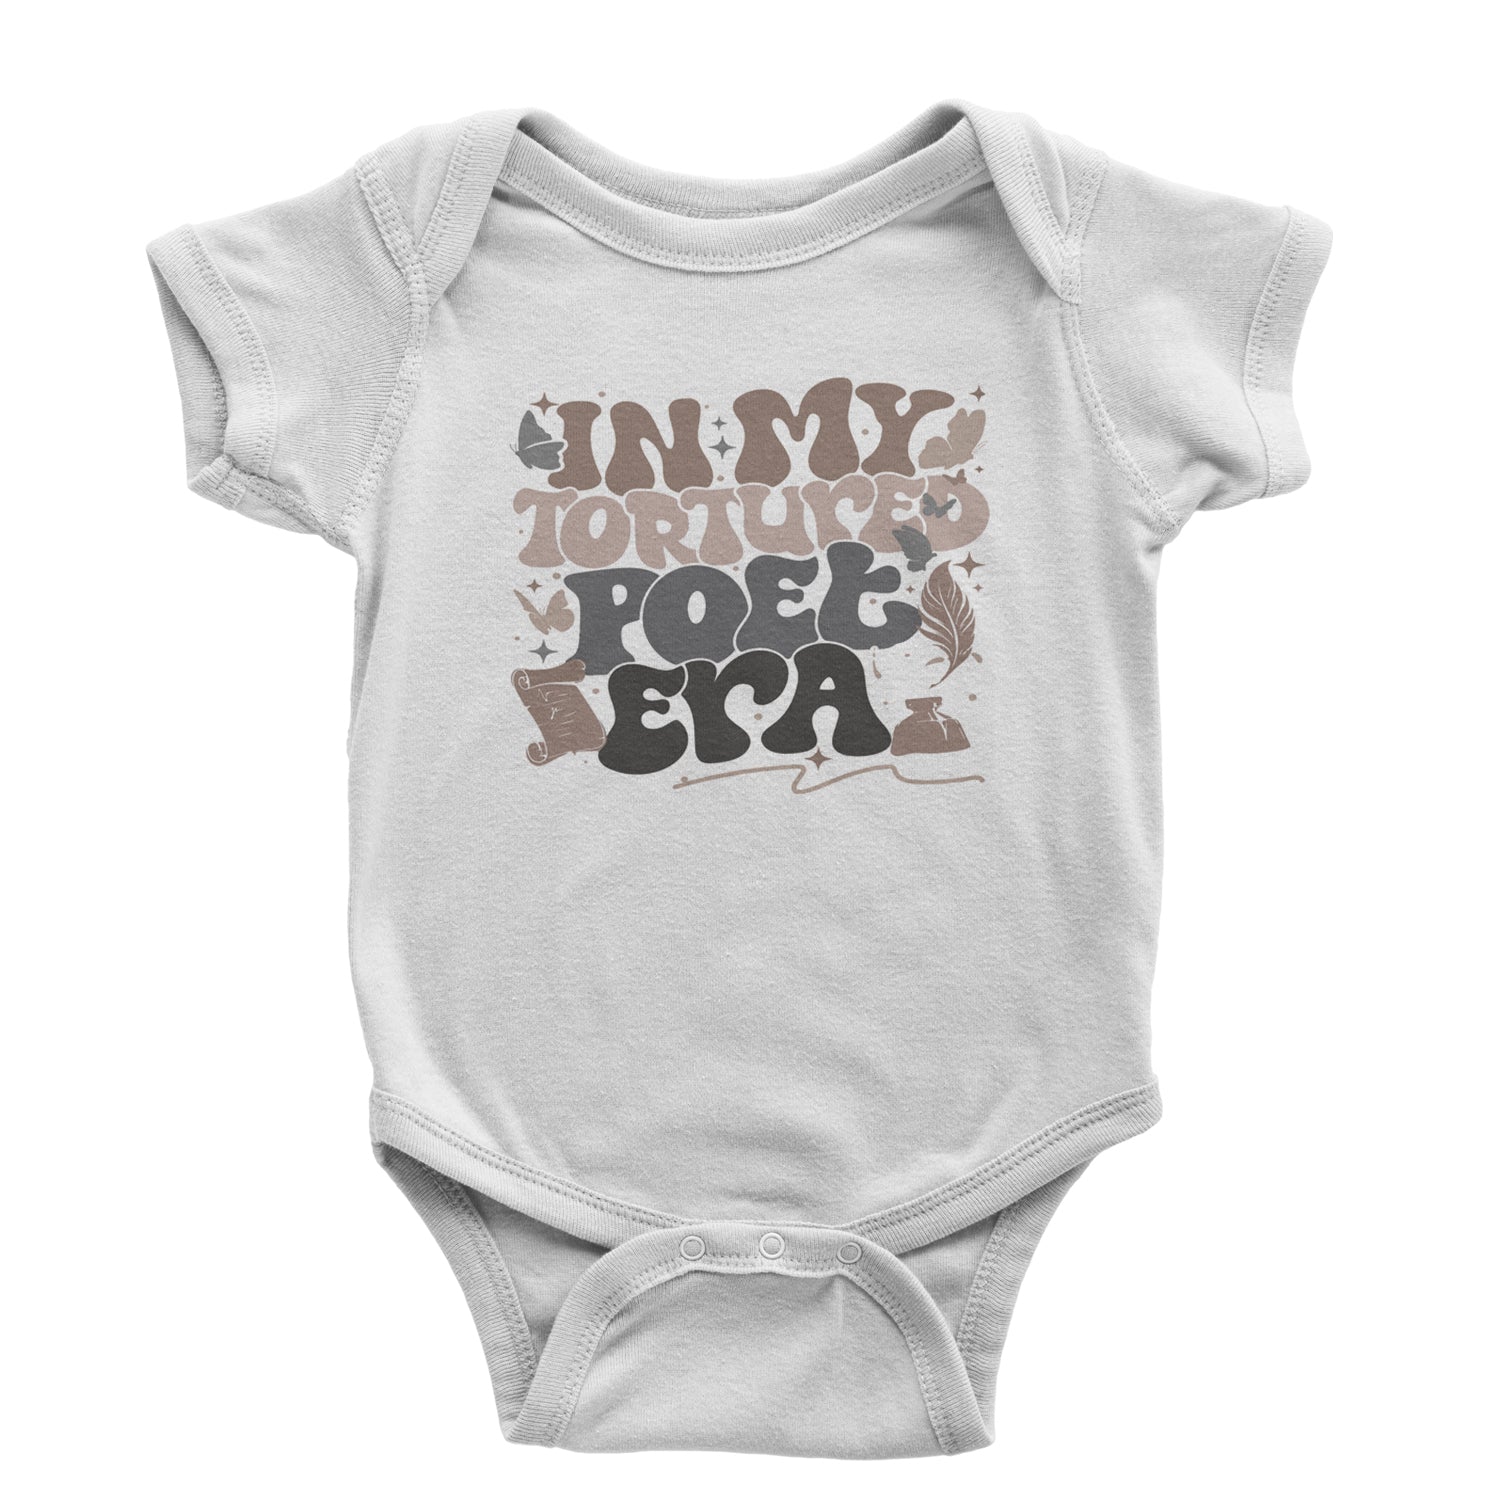 In My Tortured Poet Era TTPD Music Infant One-Piece Romper Bodysuit and Toddler T-shirt